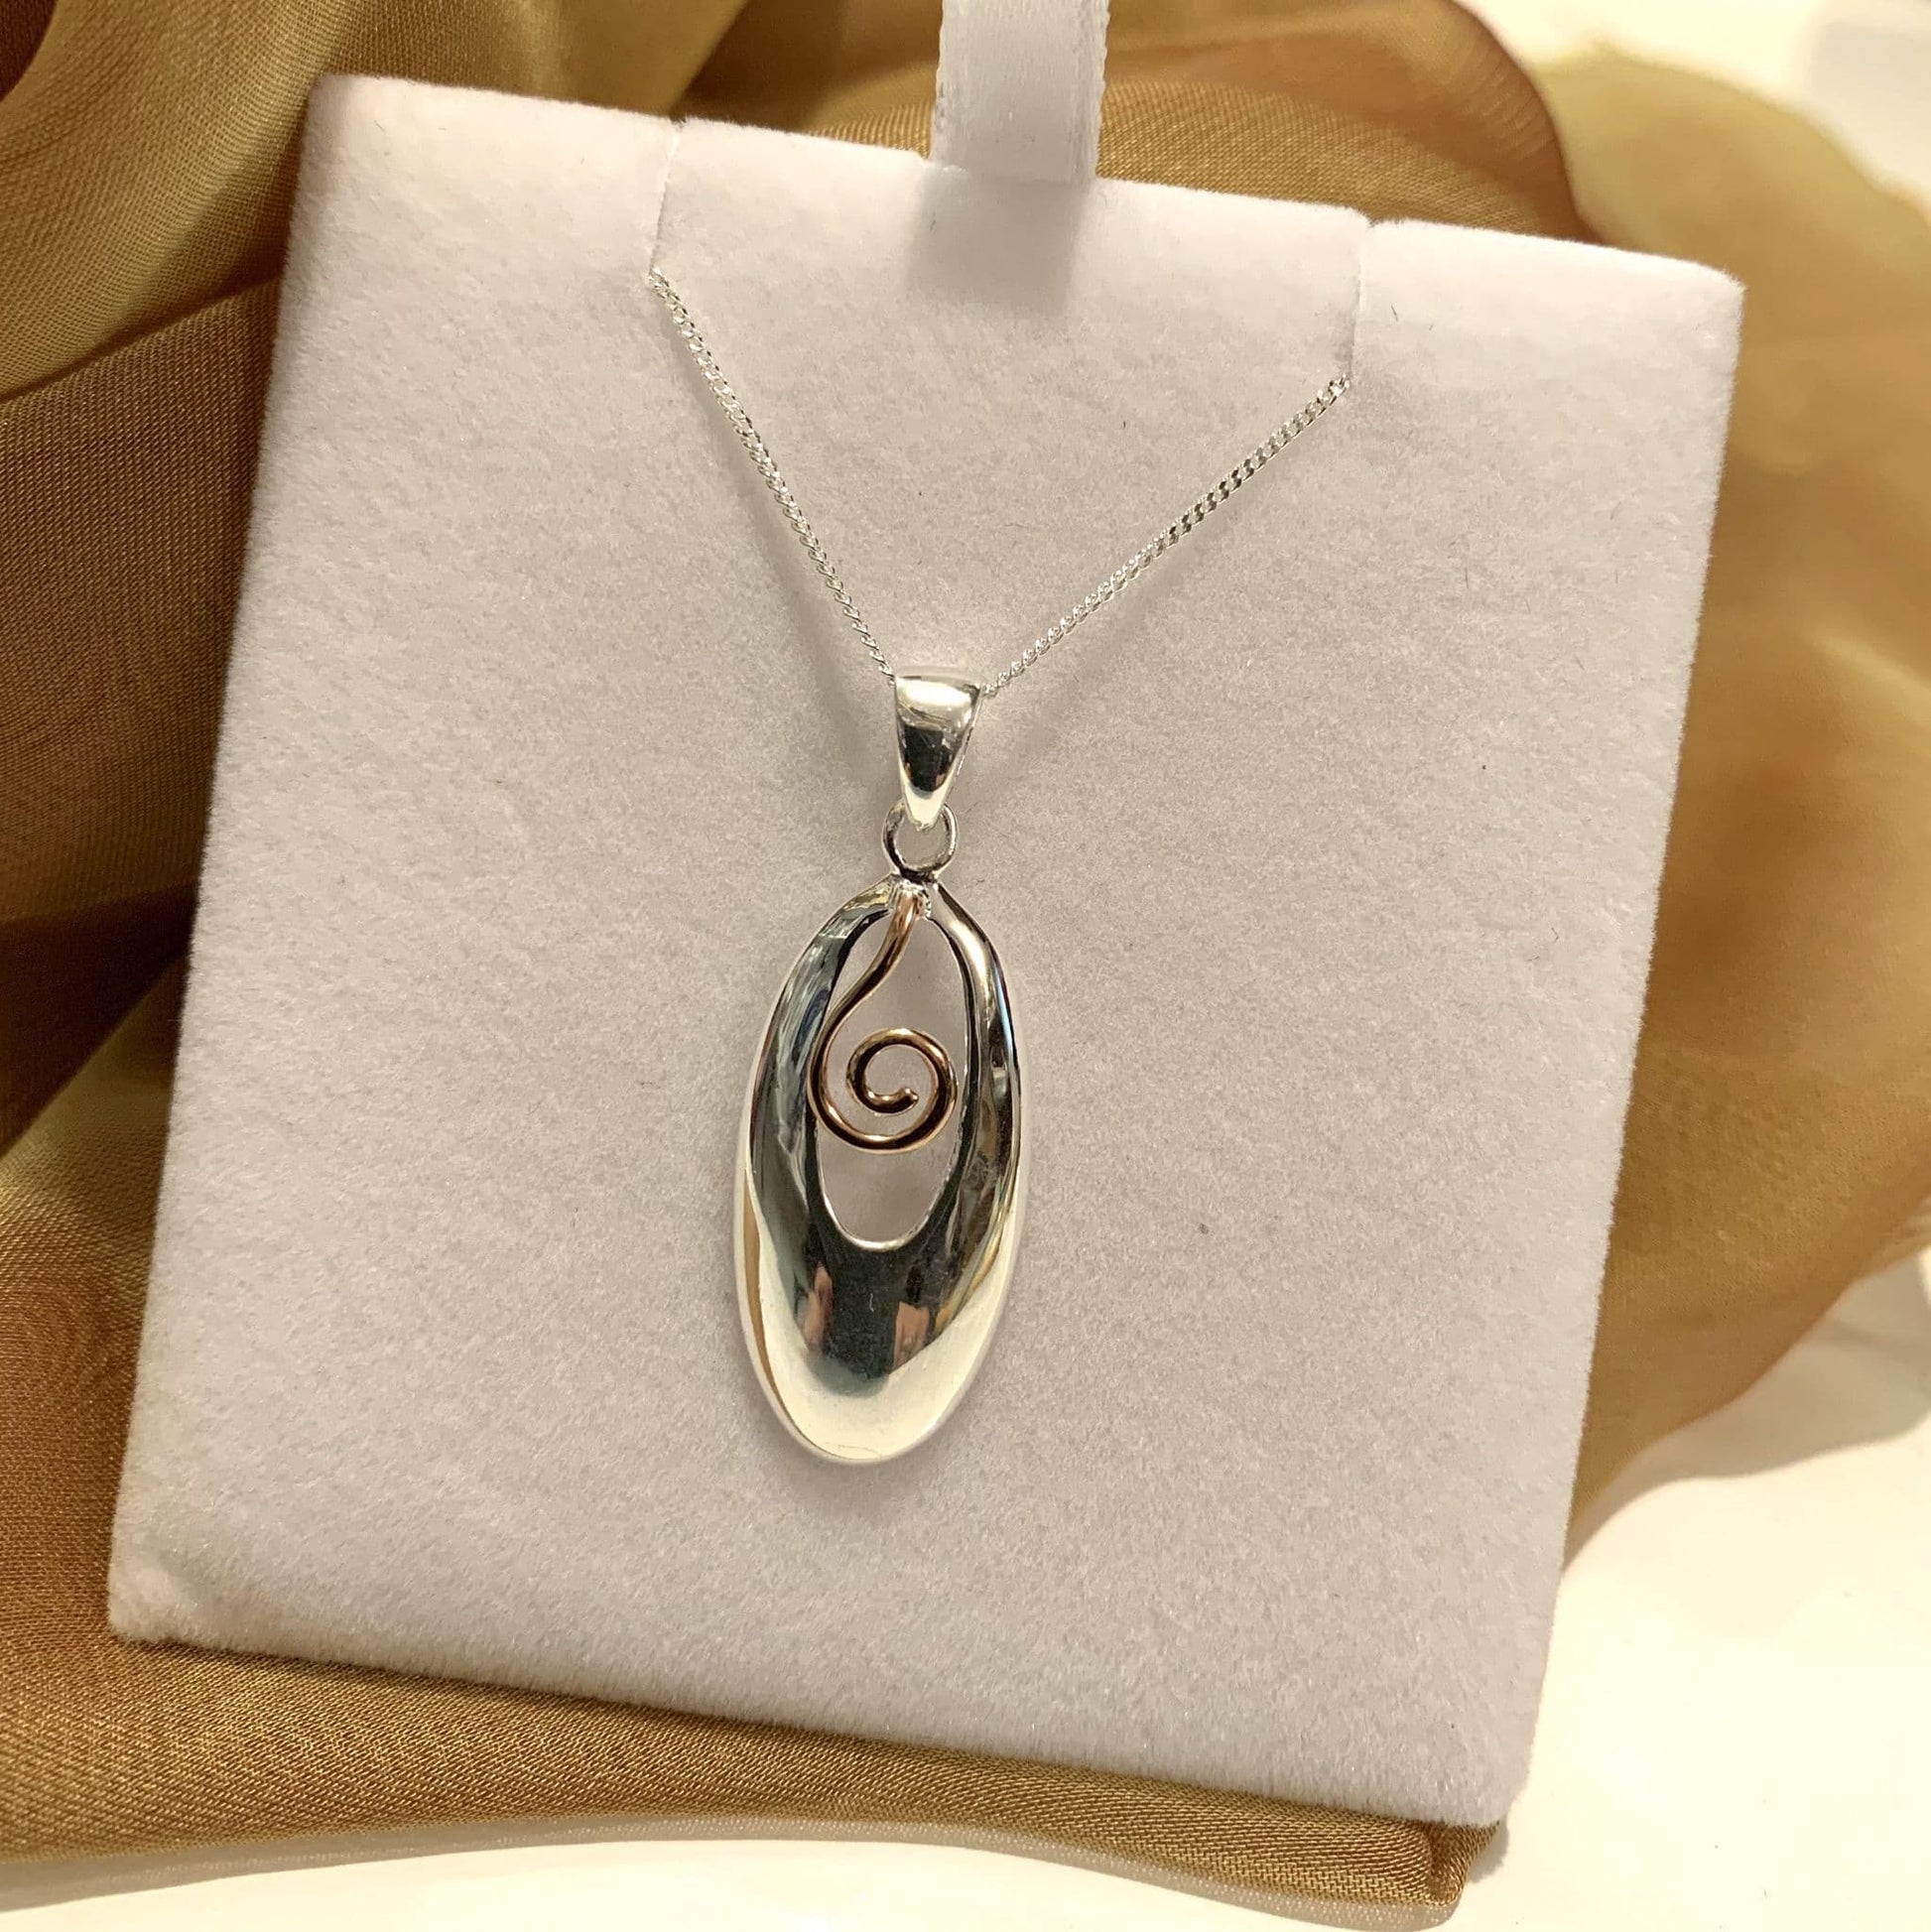 An Oval Two Tone Sterling Silver And Rose Gilt Necklace Pendant